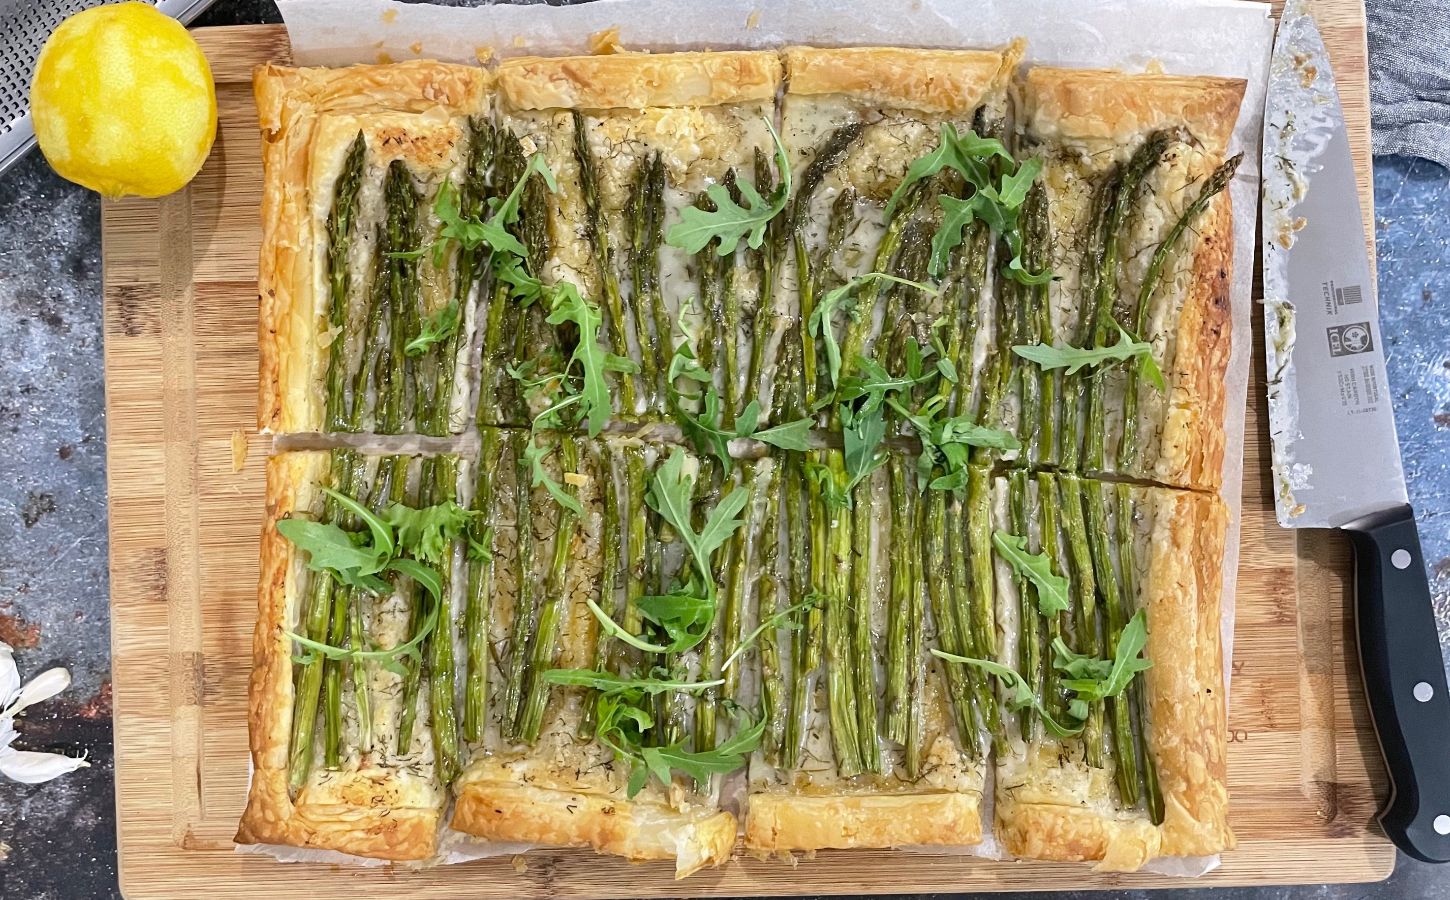 A vegan asparagus tart on a chopping board with a lemon and a knife next to it